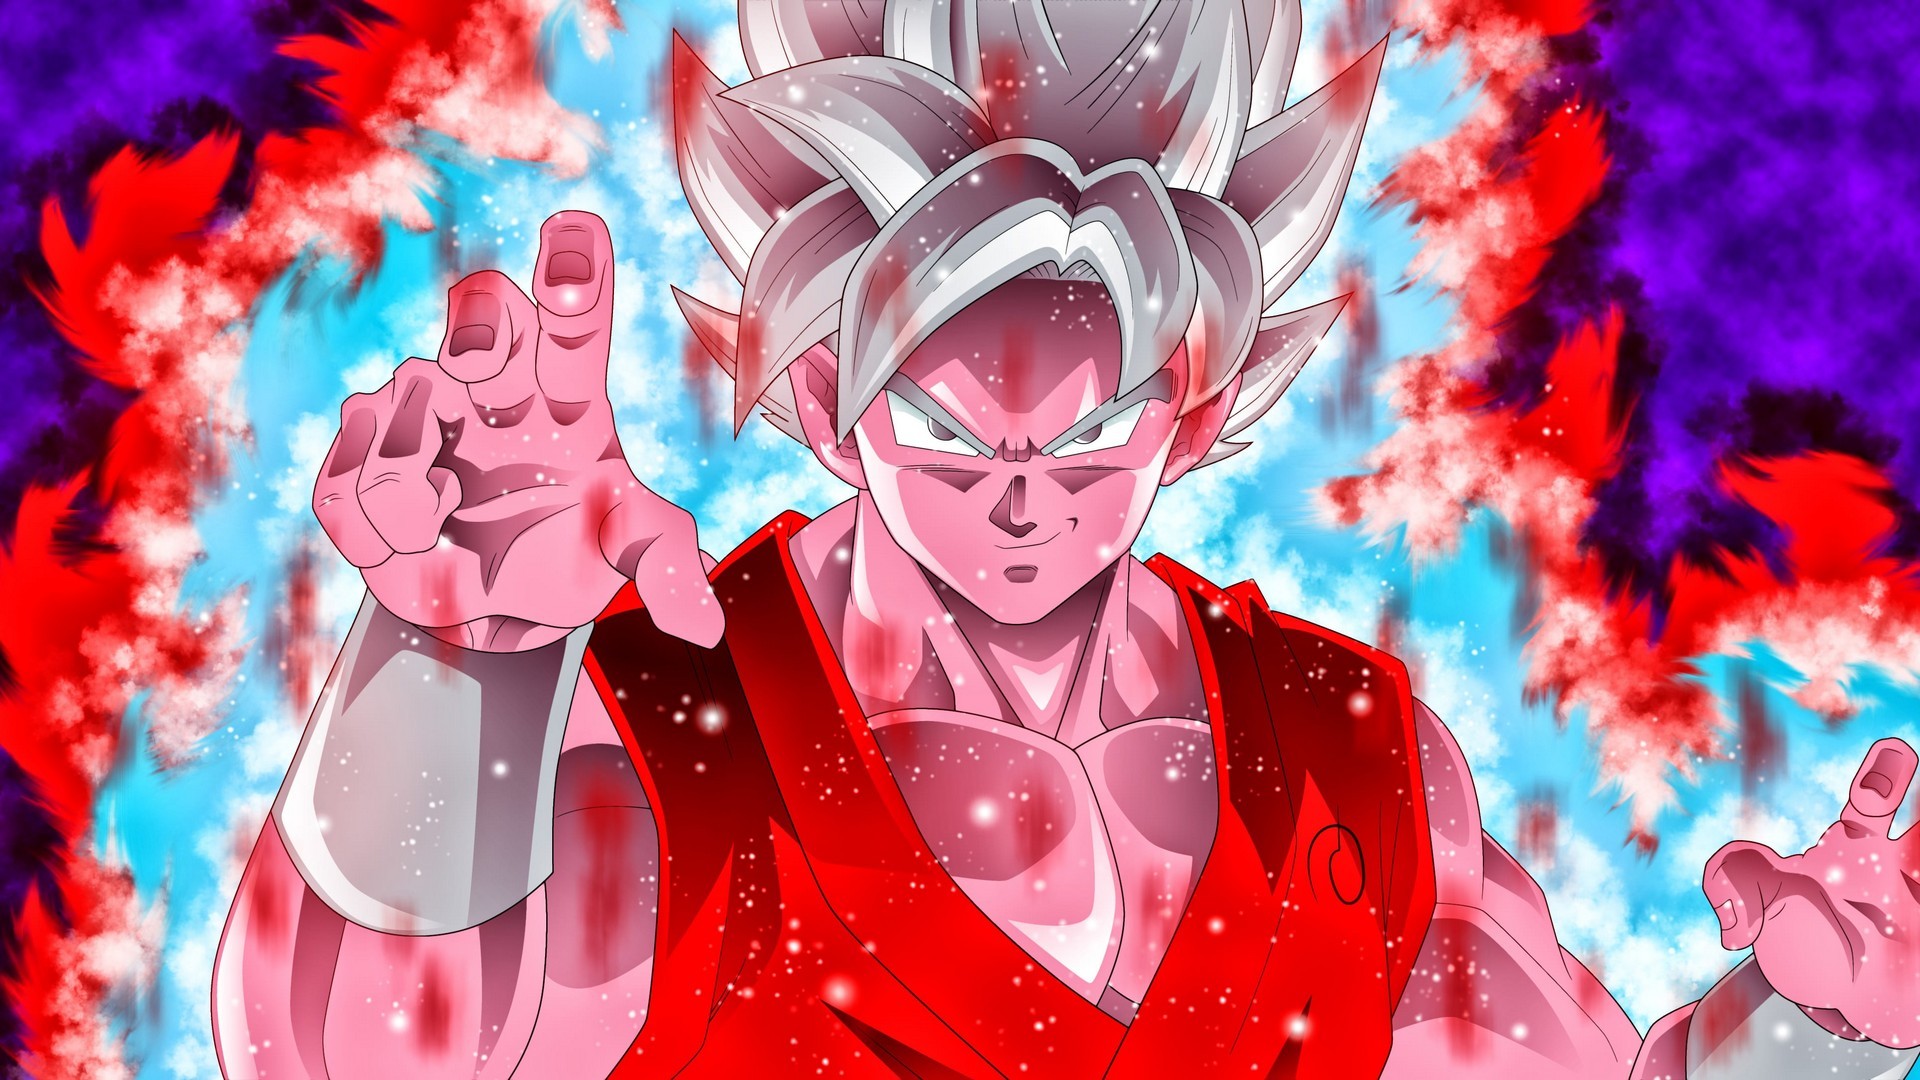 Goku Super Saiyan Desktop Wallpaper with image resolution 1920x1080 pixel. You can use this wallpaper as background for your desktop Computer Screensavers, Android or iPhone smartphones